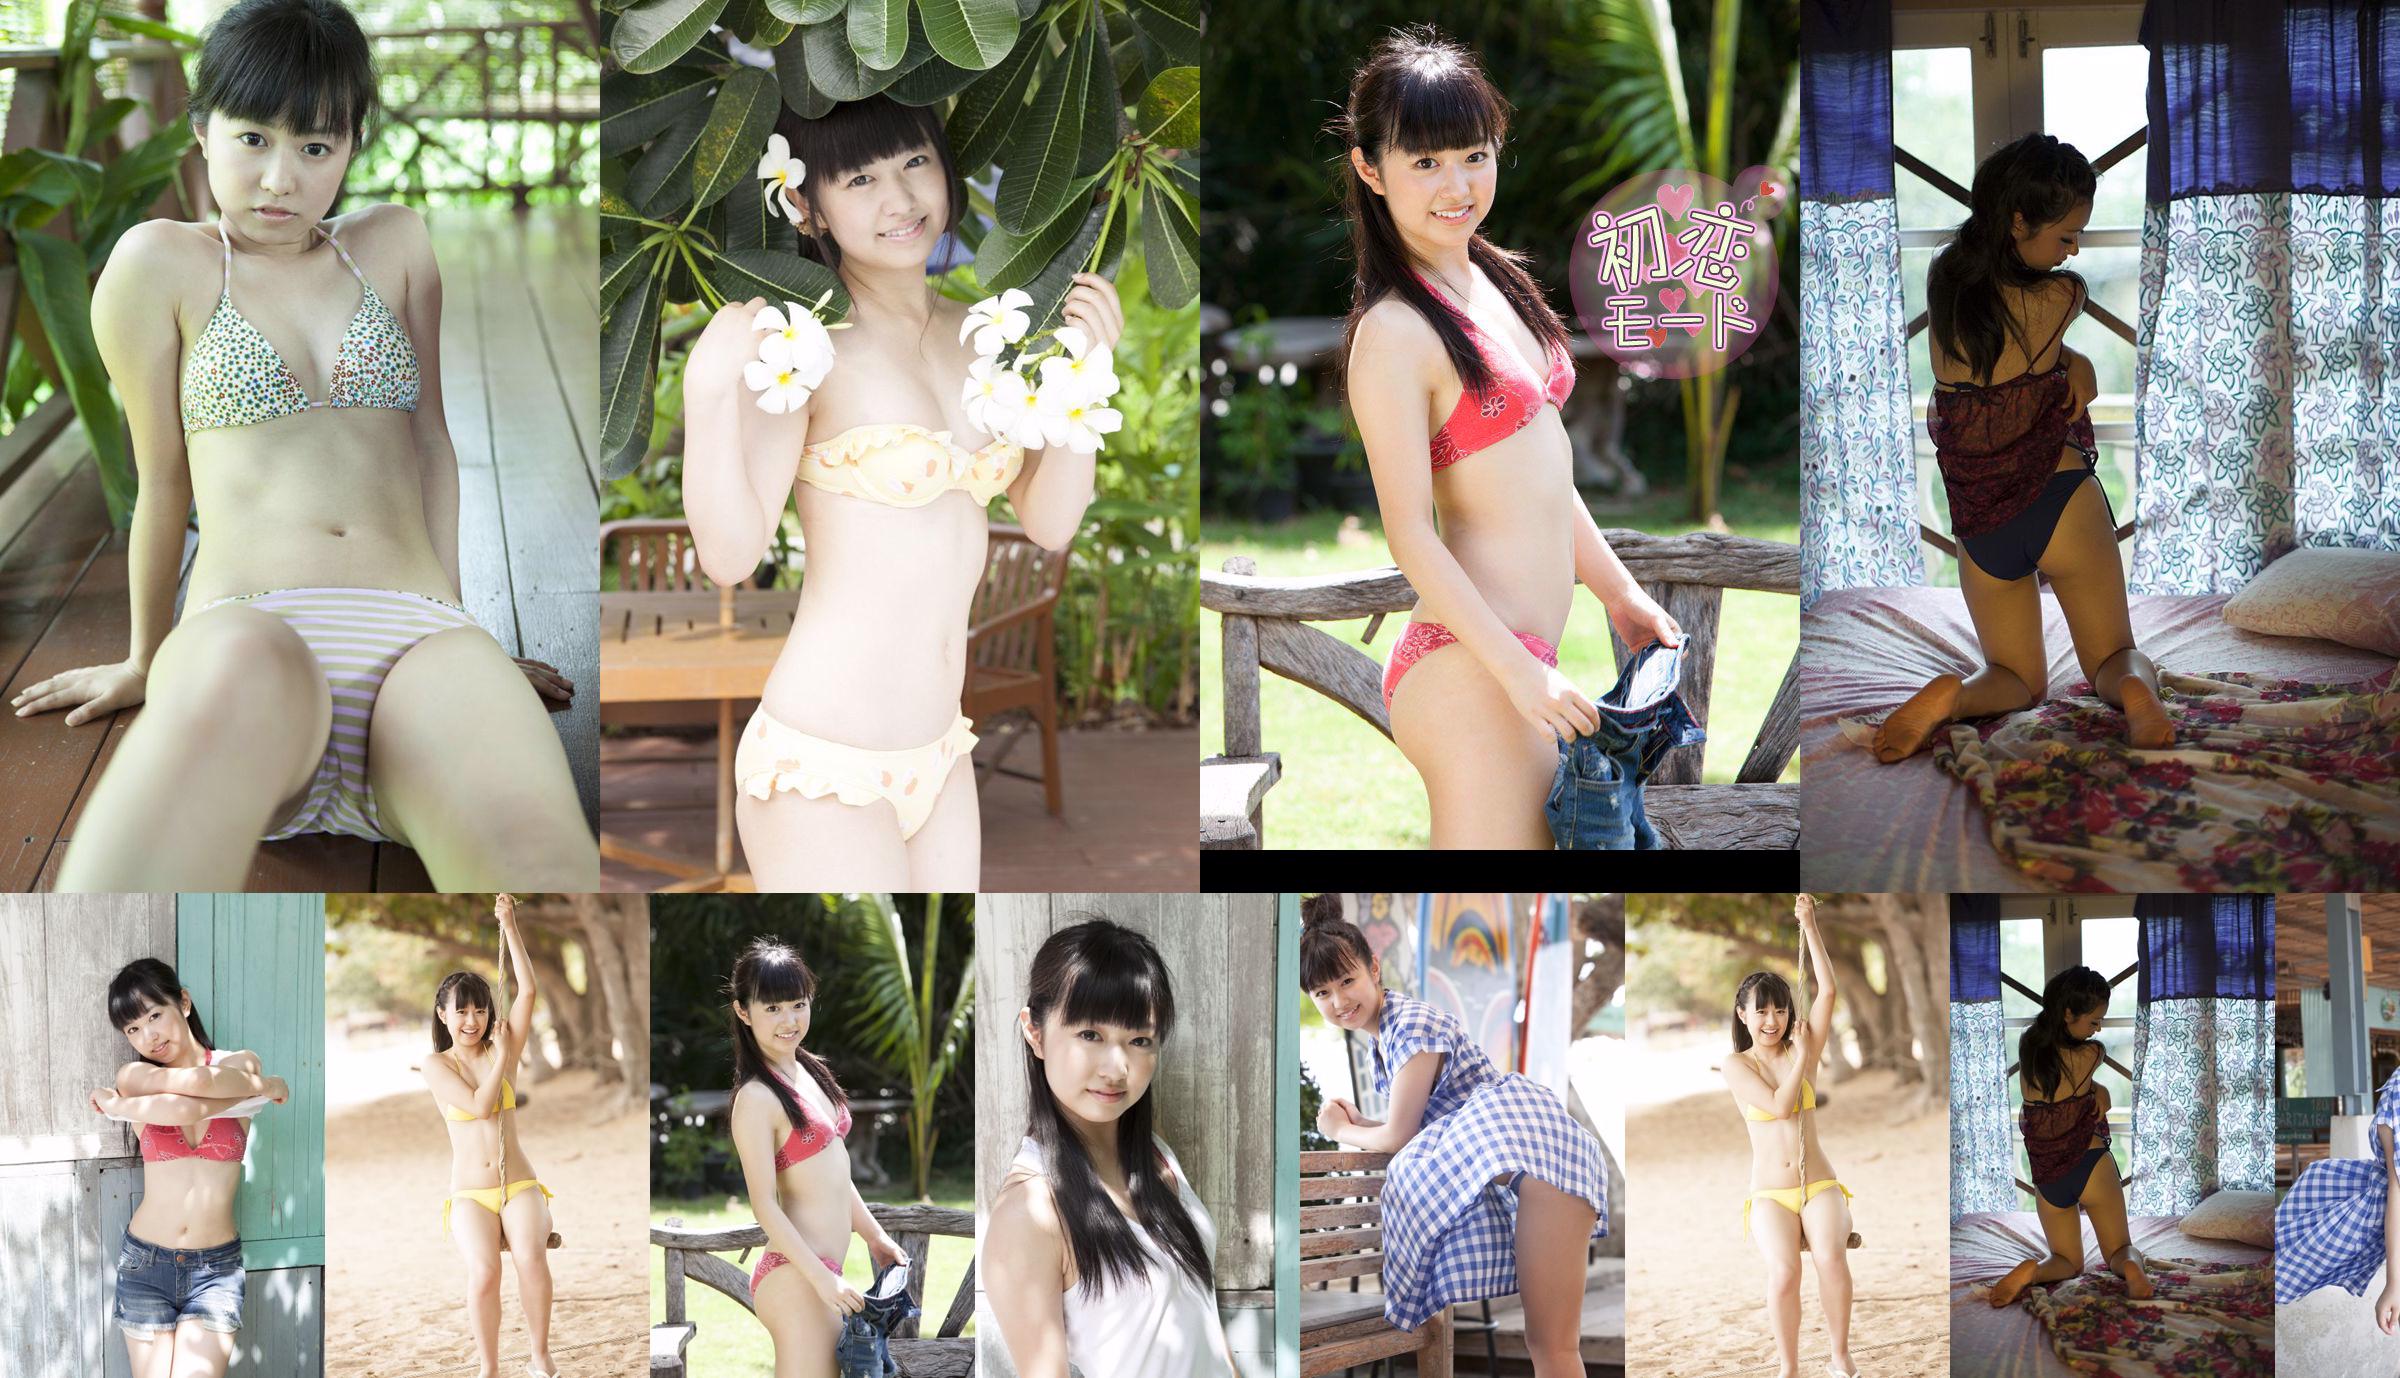 Ikura Aimi "ANOTHER ANGEL" [Image.tv] No.532d7f Page 1